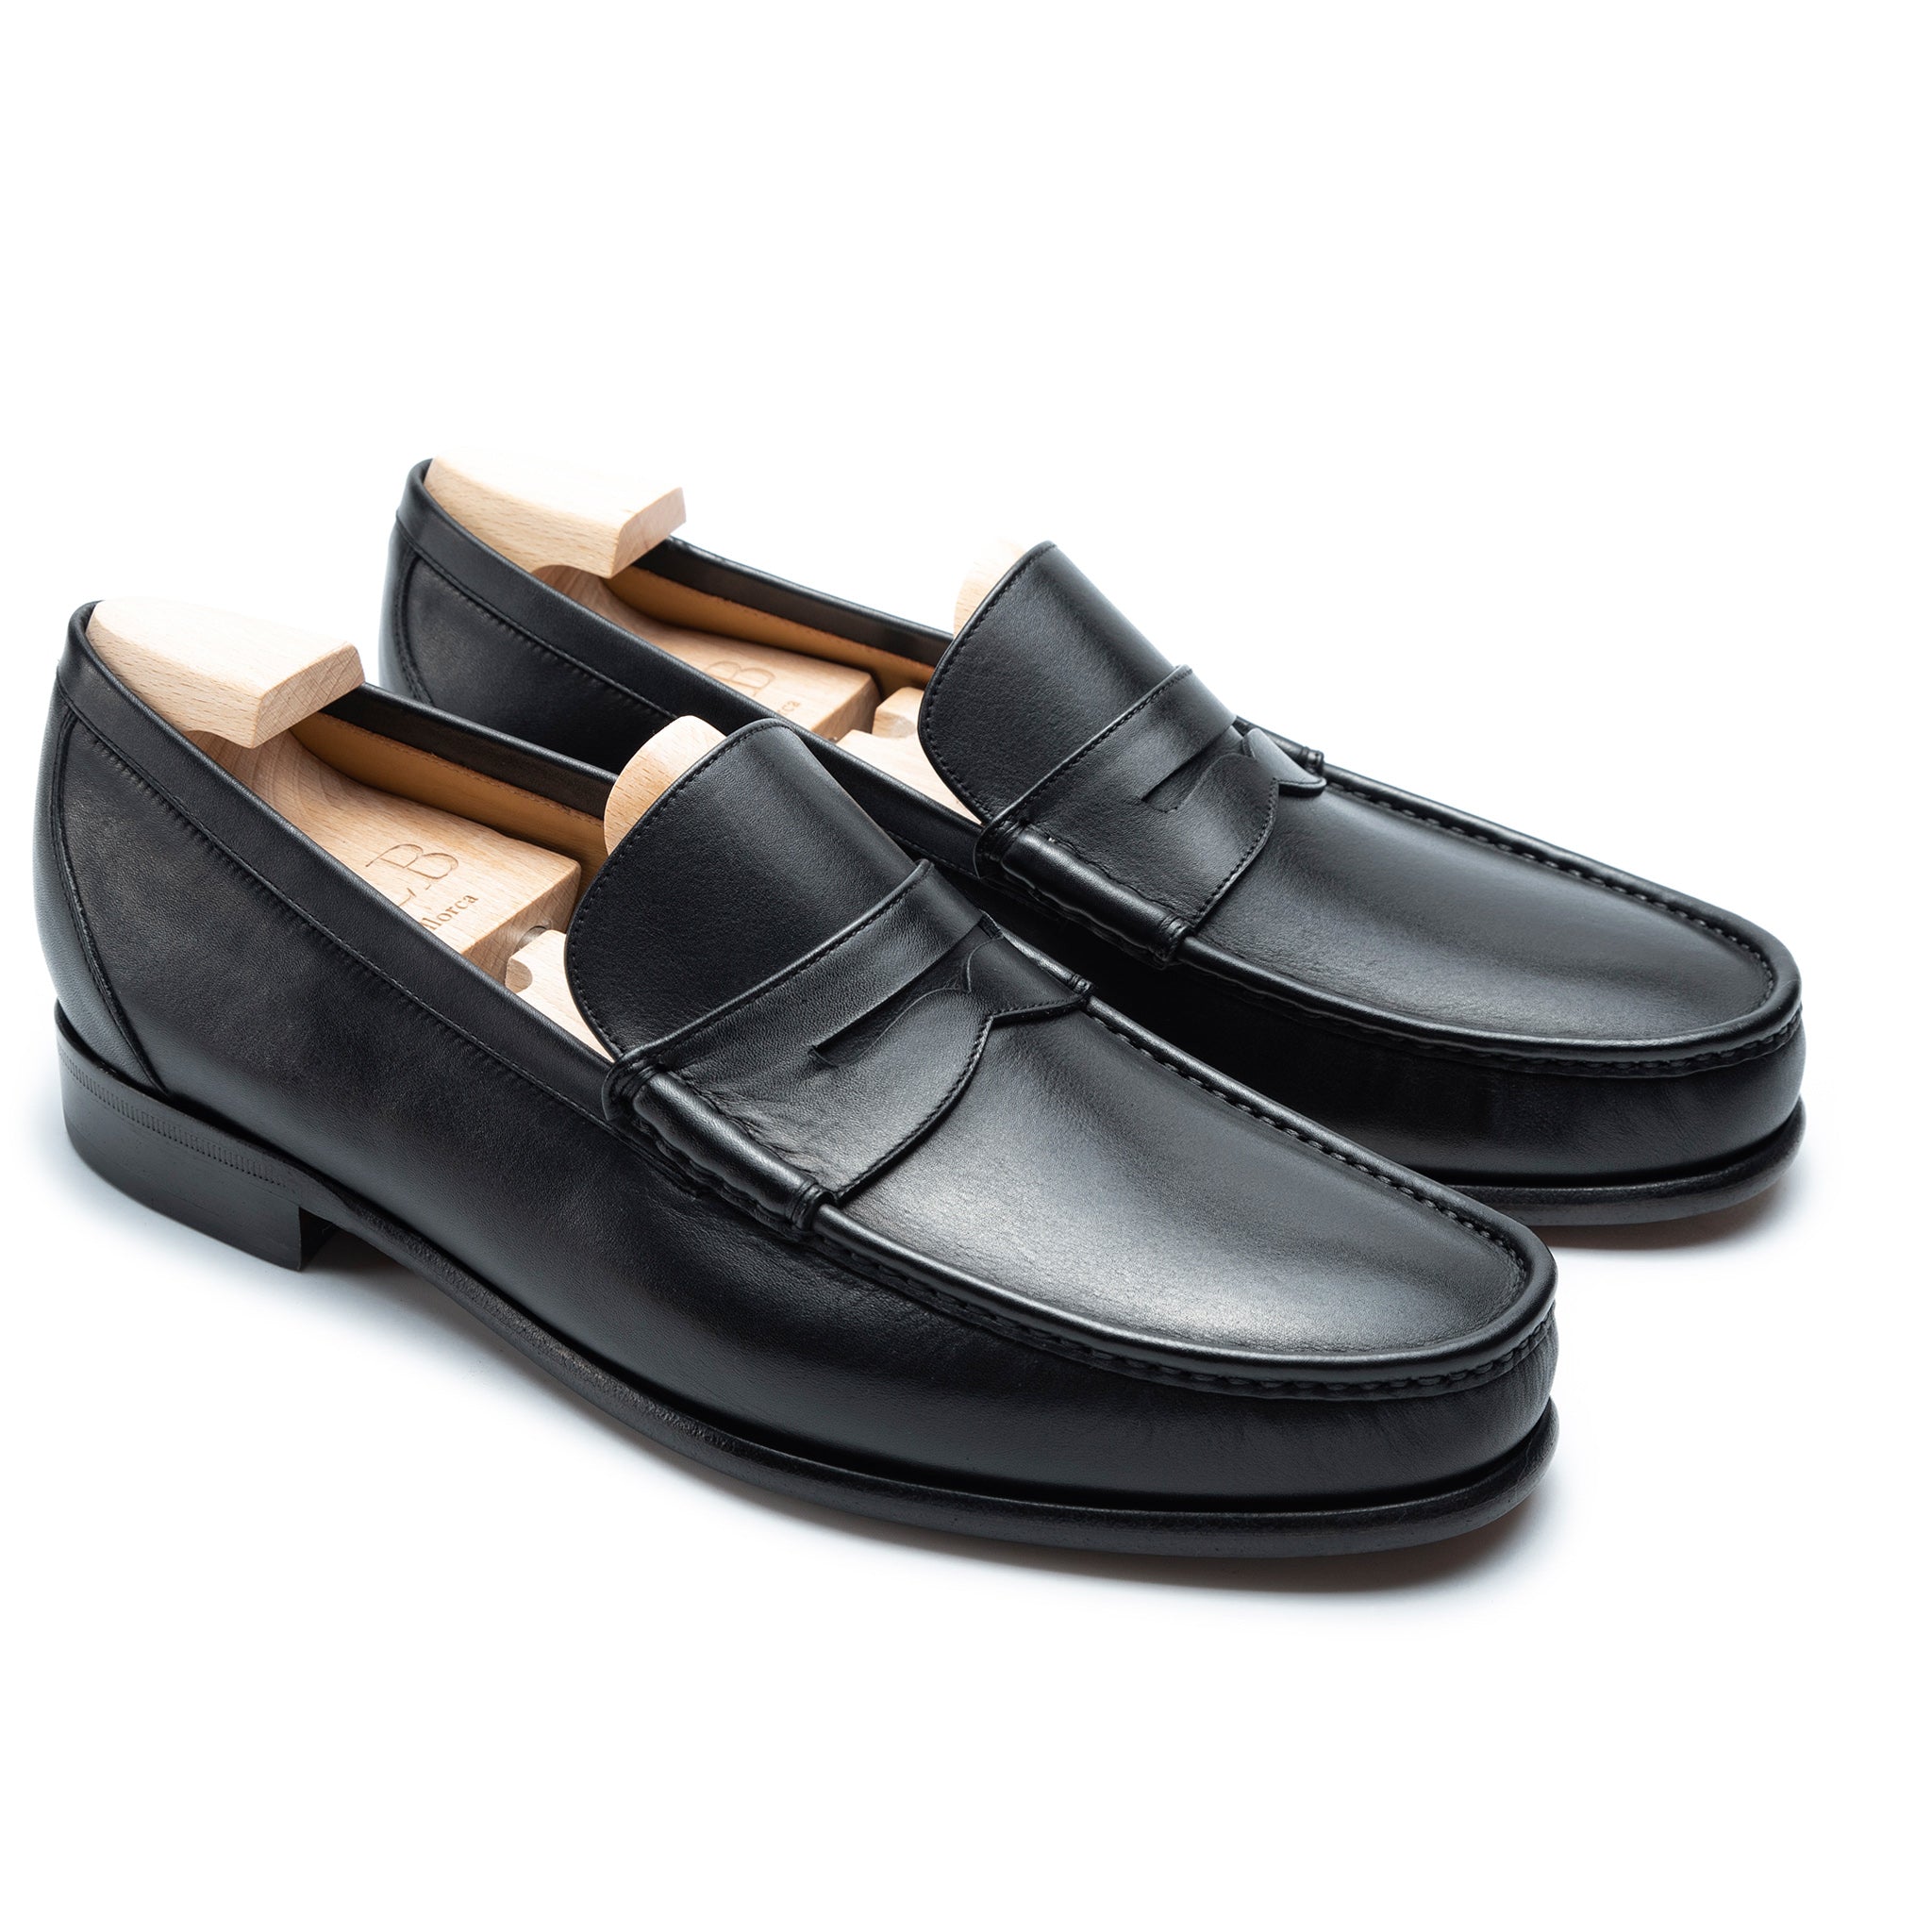 TLB Mallorca Oxford loafers | Men's Oxford shoes | Model 2510 funchal black